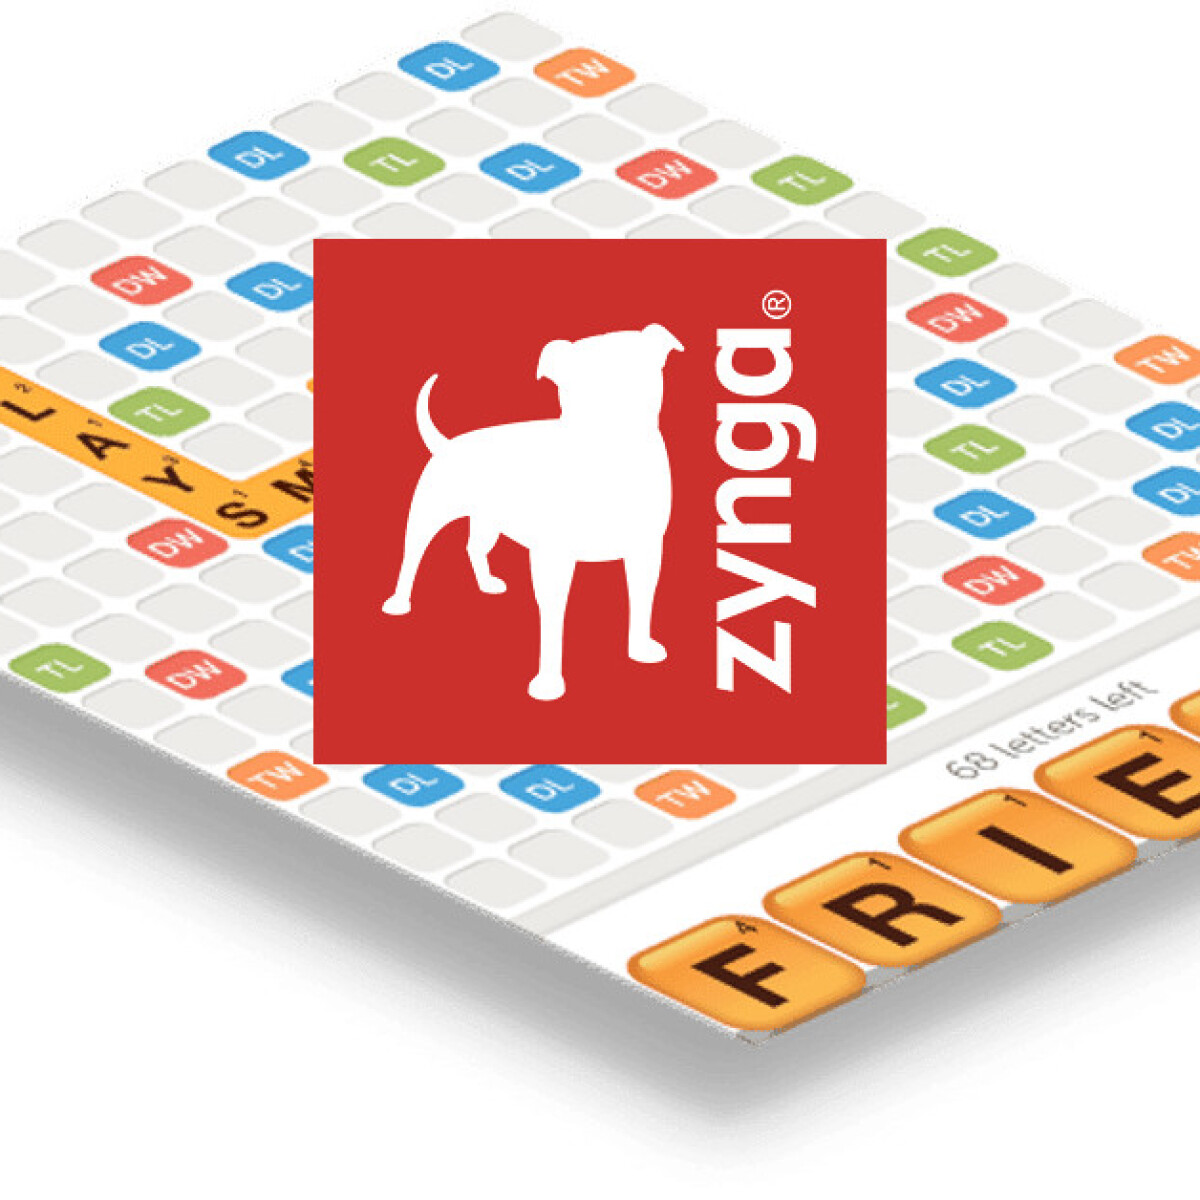 Instrument fleet Apply 218M 'Words with Friends' players' data reportedly stolen in Zynga hack  (Updated)